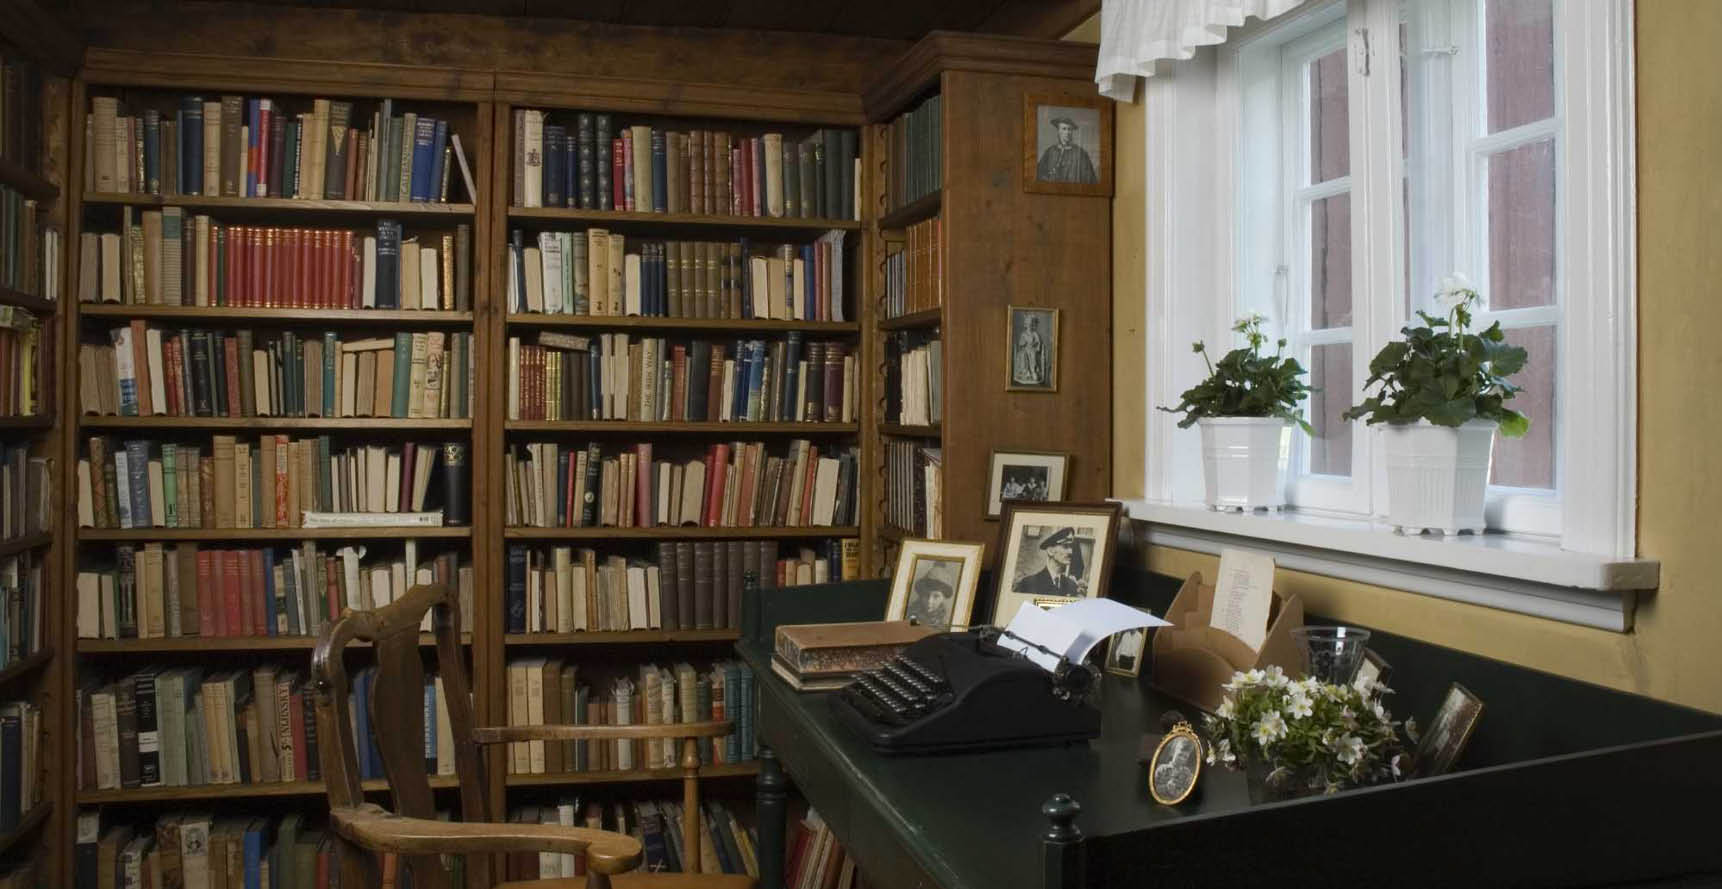 Living room at Bjerkebær - home of the author Sigrid Undset